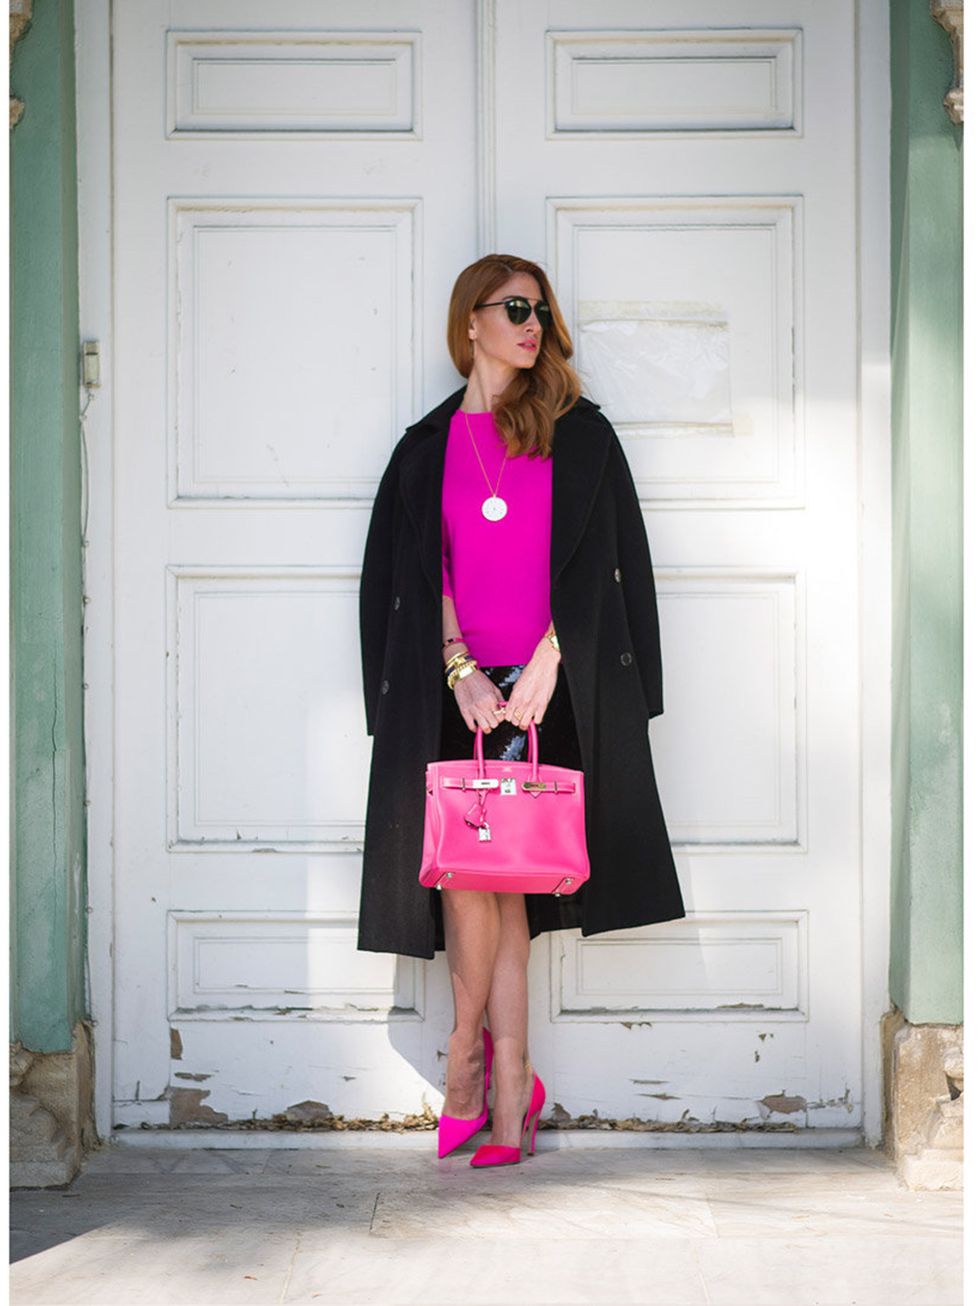 <p>Hande Yuece wears Max Mara coat, a vintage skirt, J.Crew top, Hermes bag, Ulseven shoes with jewellery from Cartier, Dior sunglasses </p>